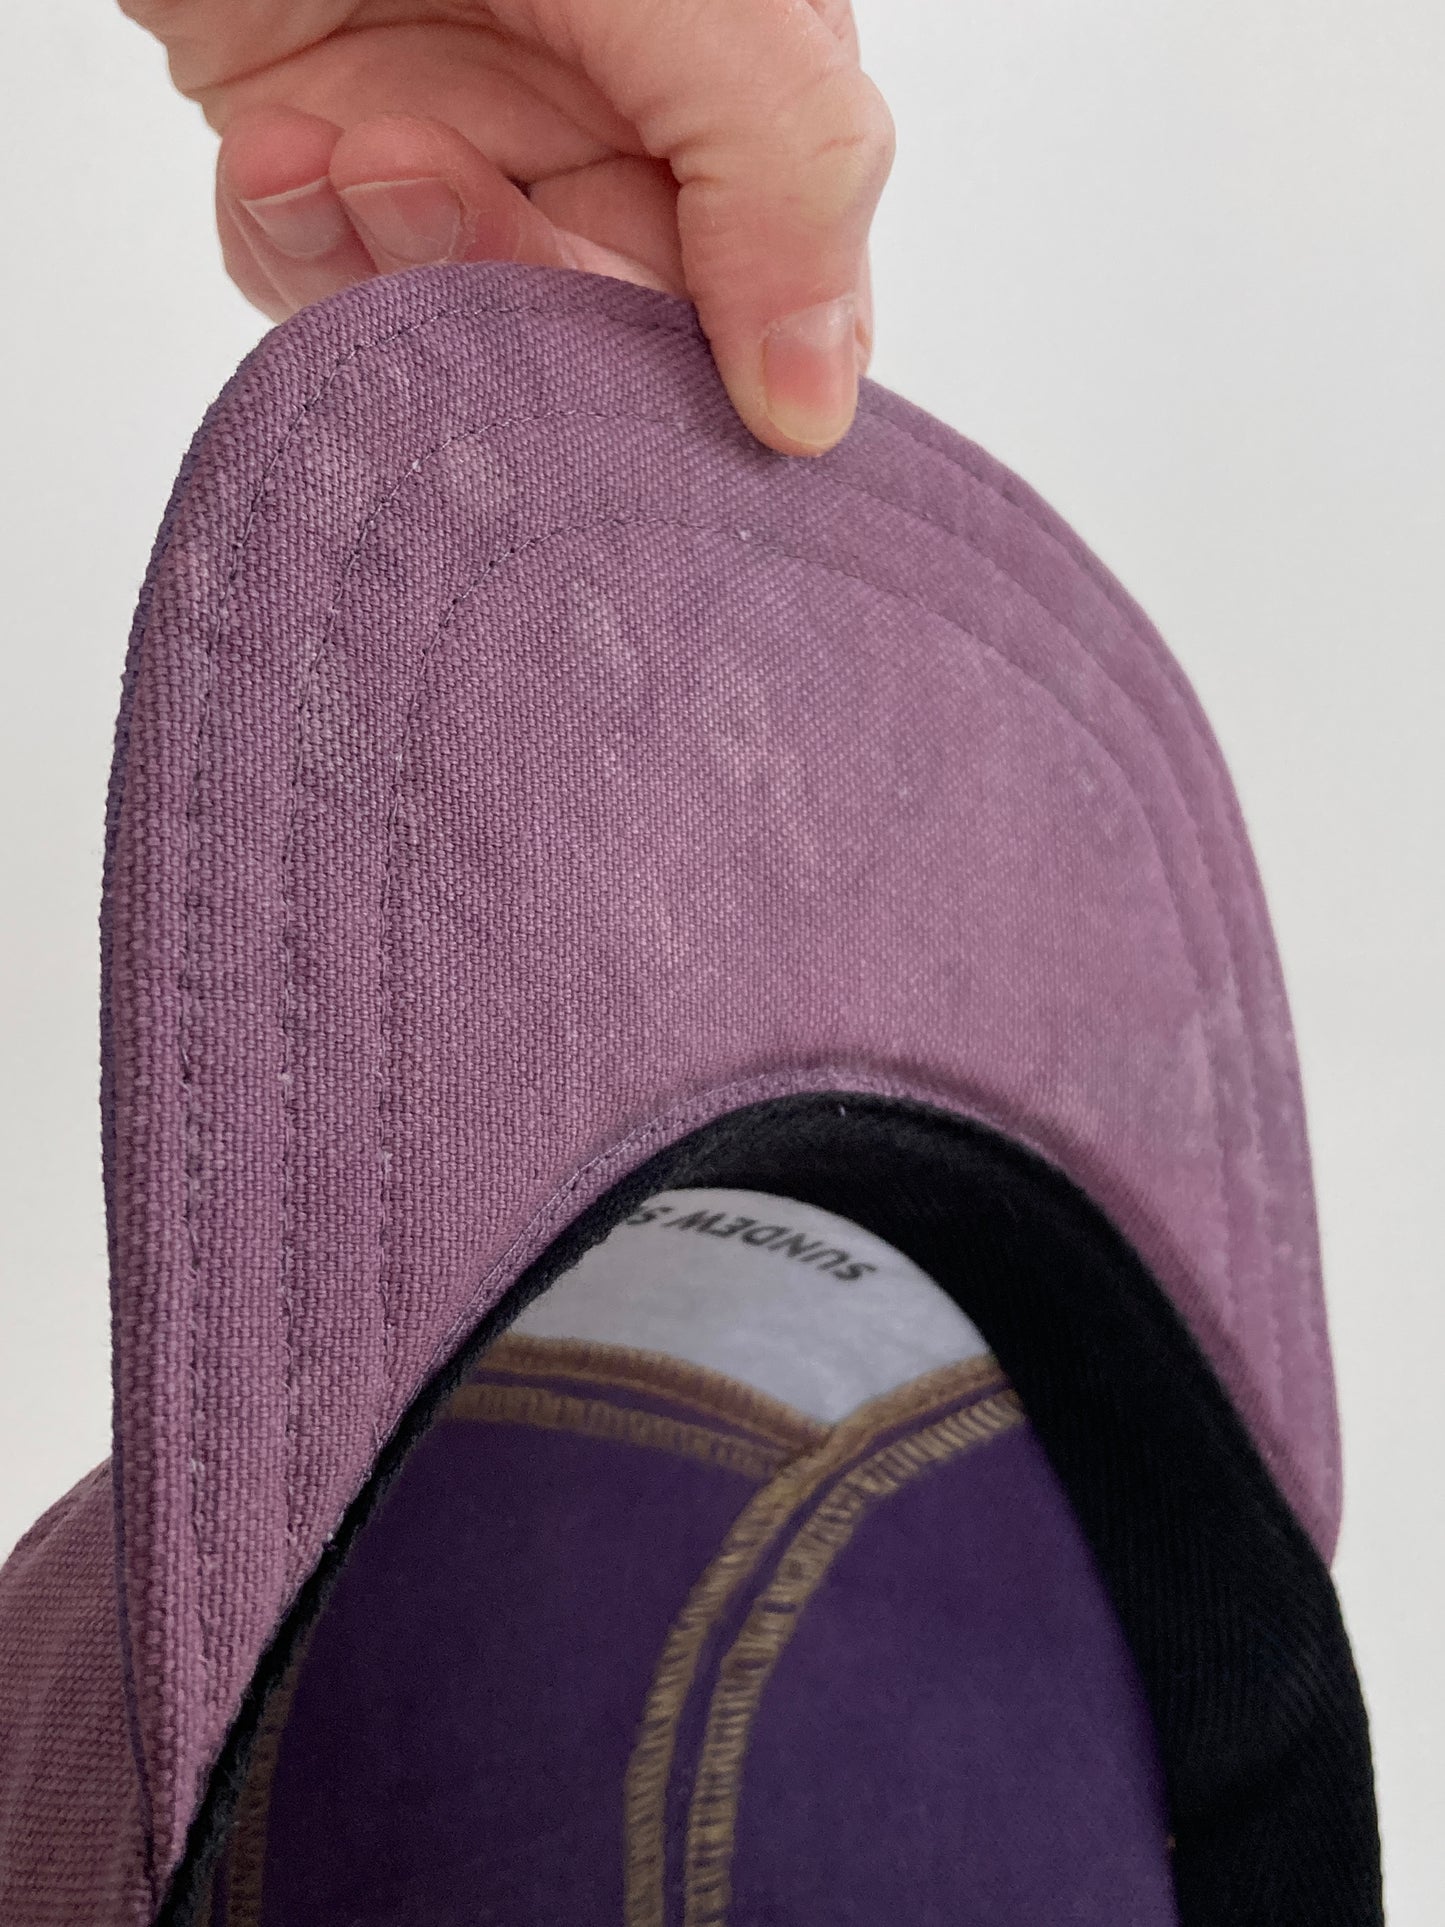 Naturally Dyed Camp Hat - Grape Jelly